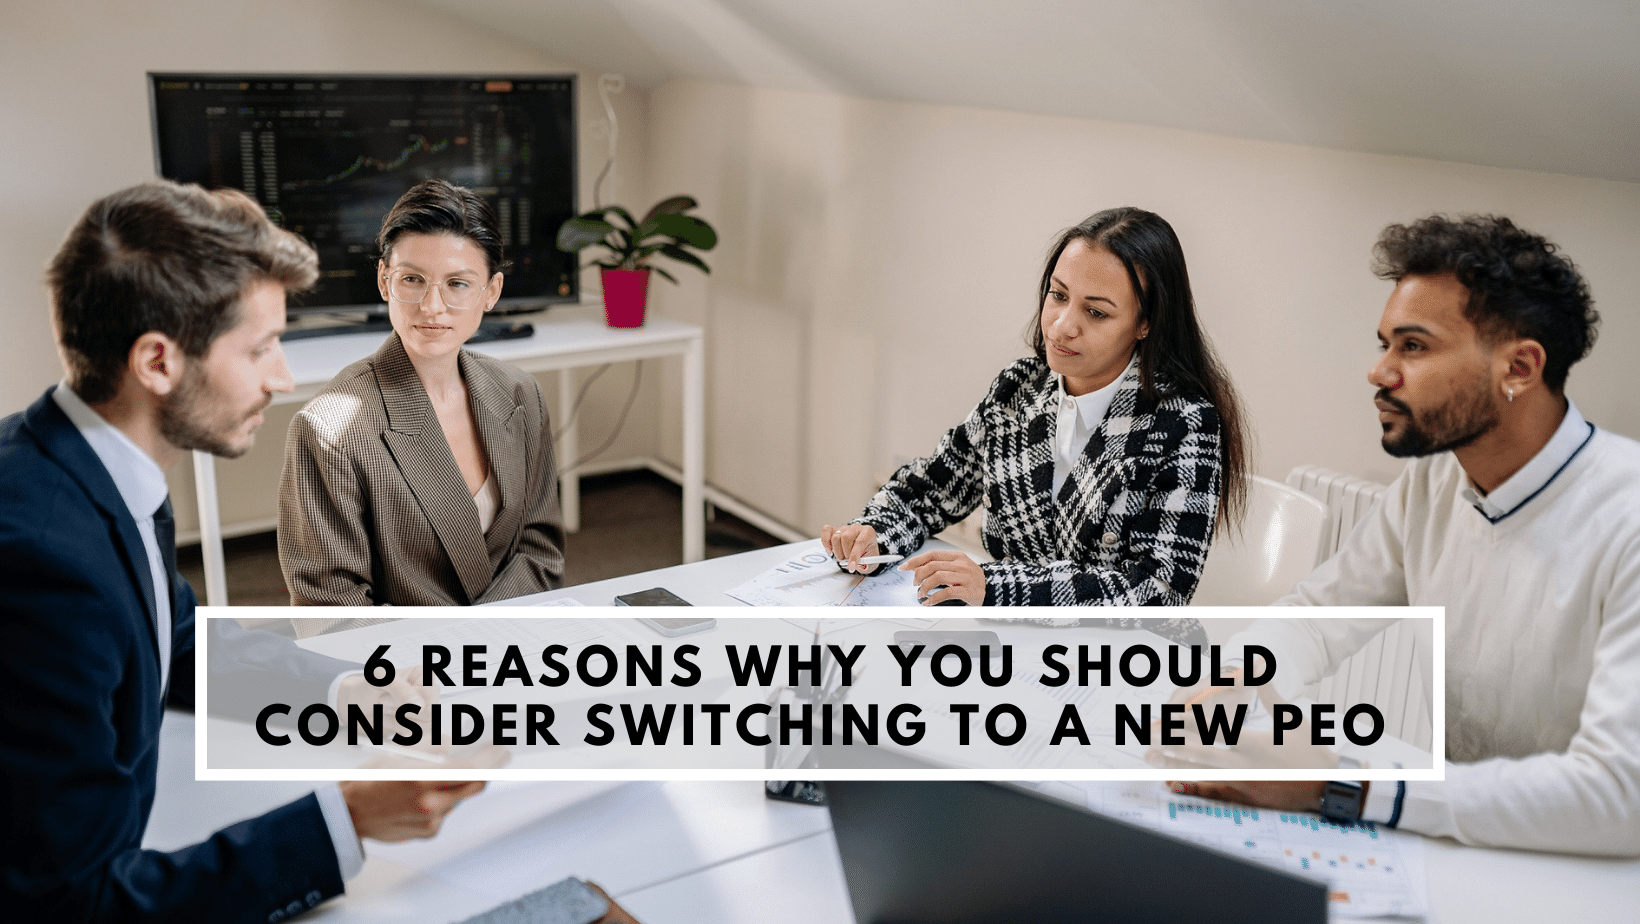 6 Reasons Why You Should Consider Switching to a New PEO